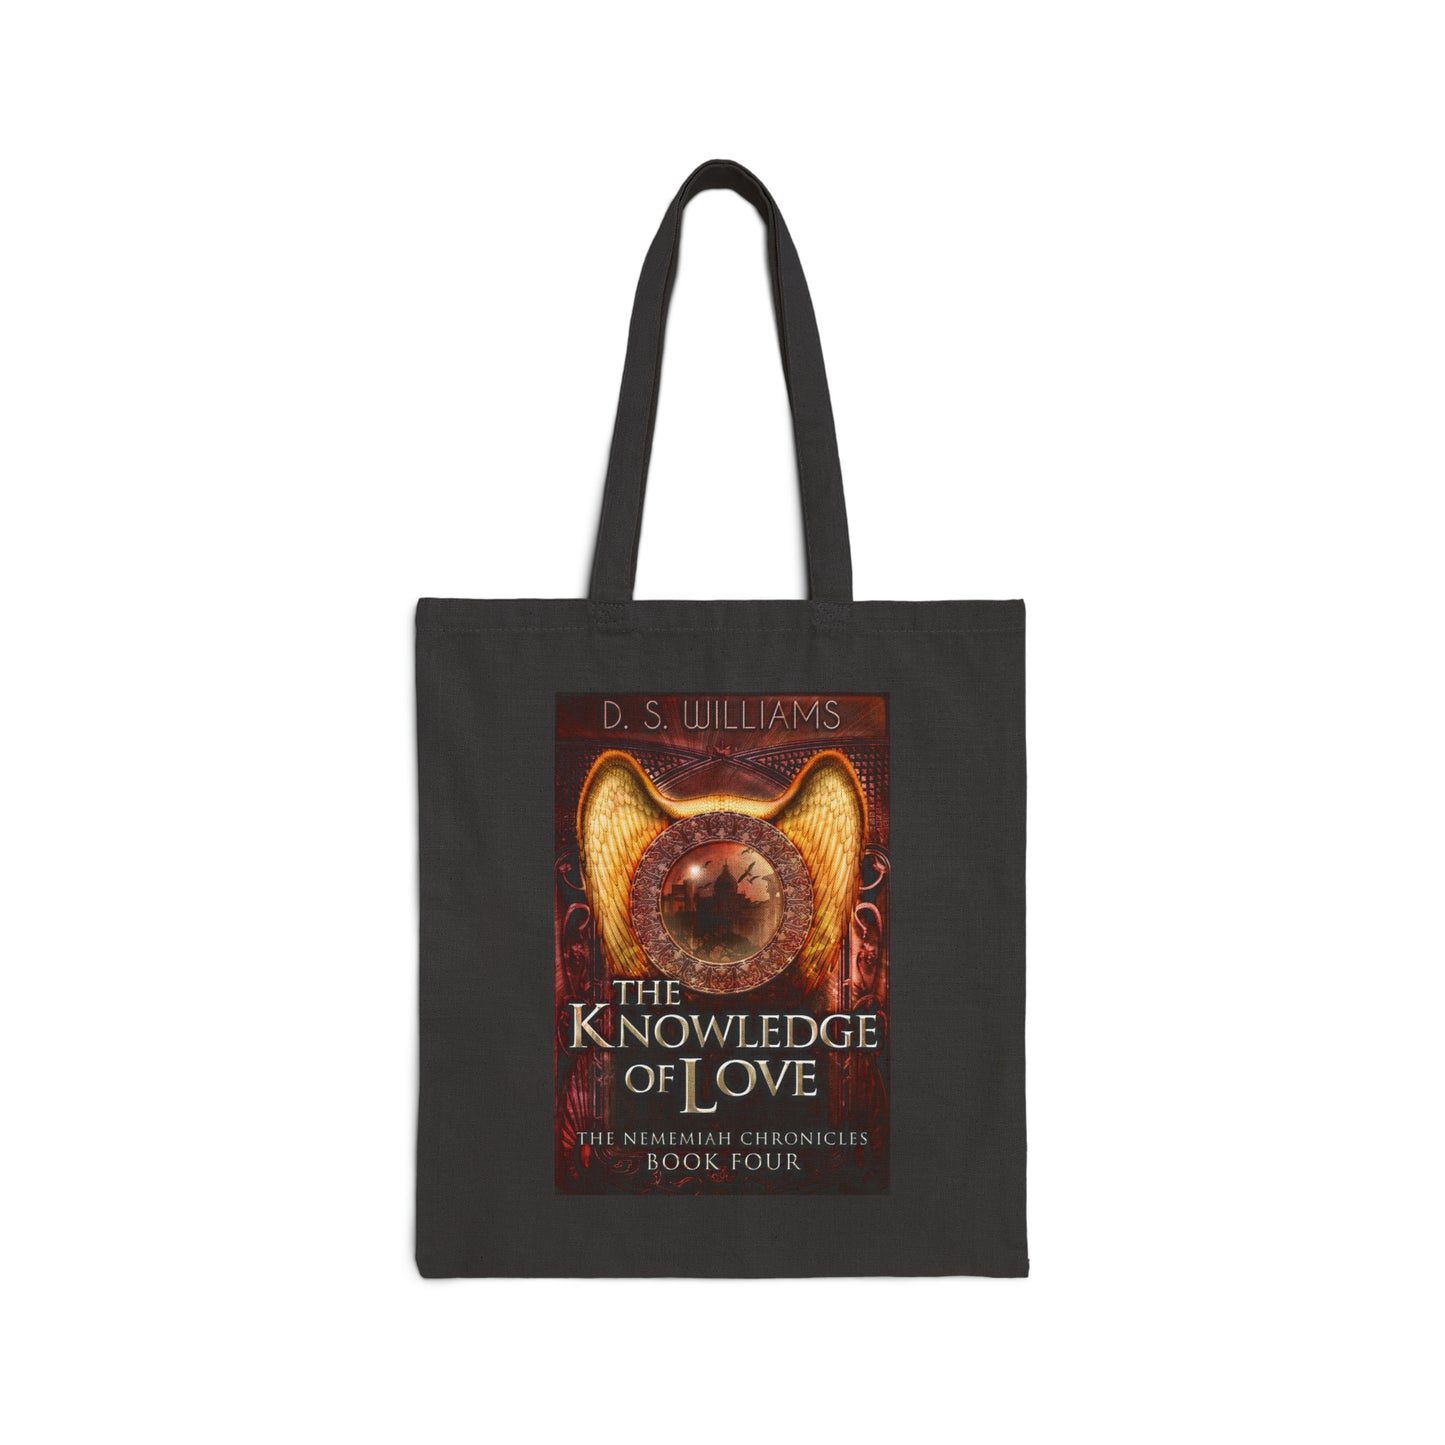 The Knowledge of Love - Cotton Canvas Tote Bag